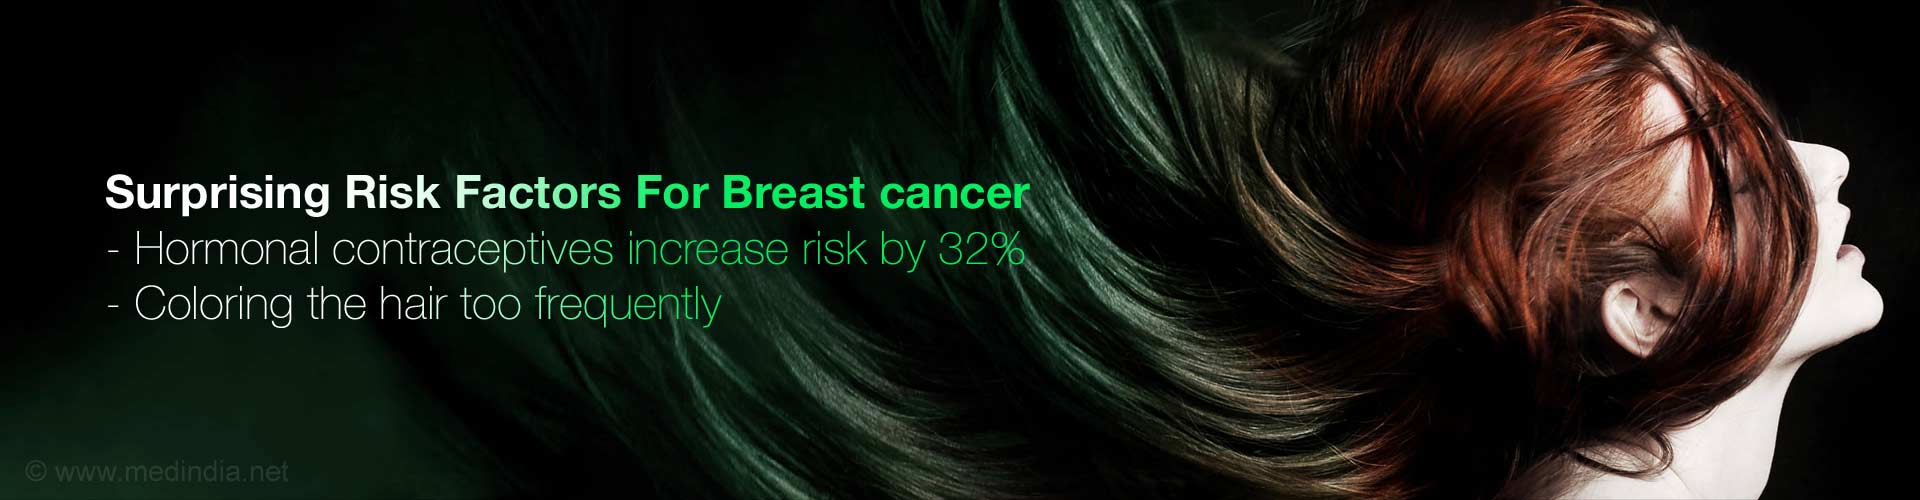 Surprising risk factors for breast cancer
- Hormonal contraceptives increase risk by 32%
- Coloring the hair too frequently